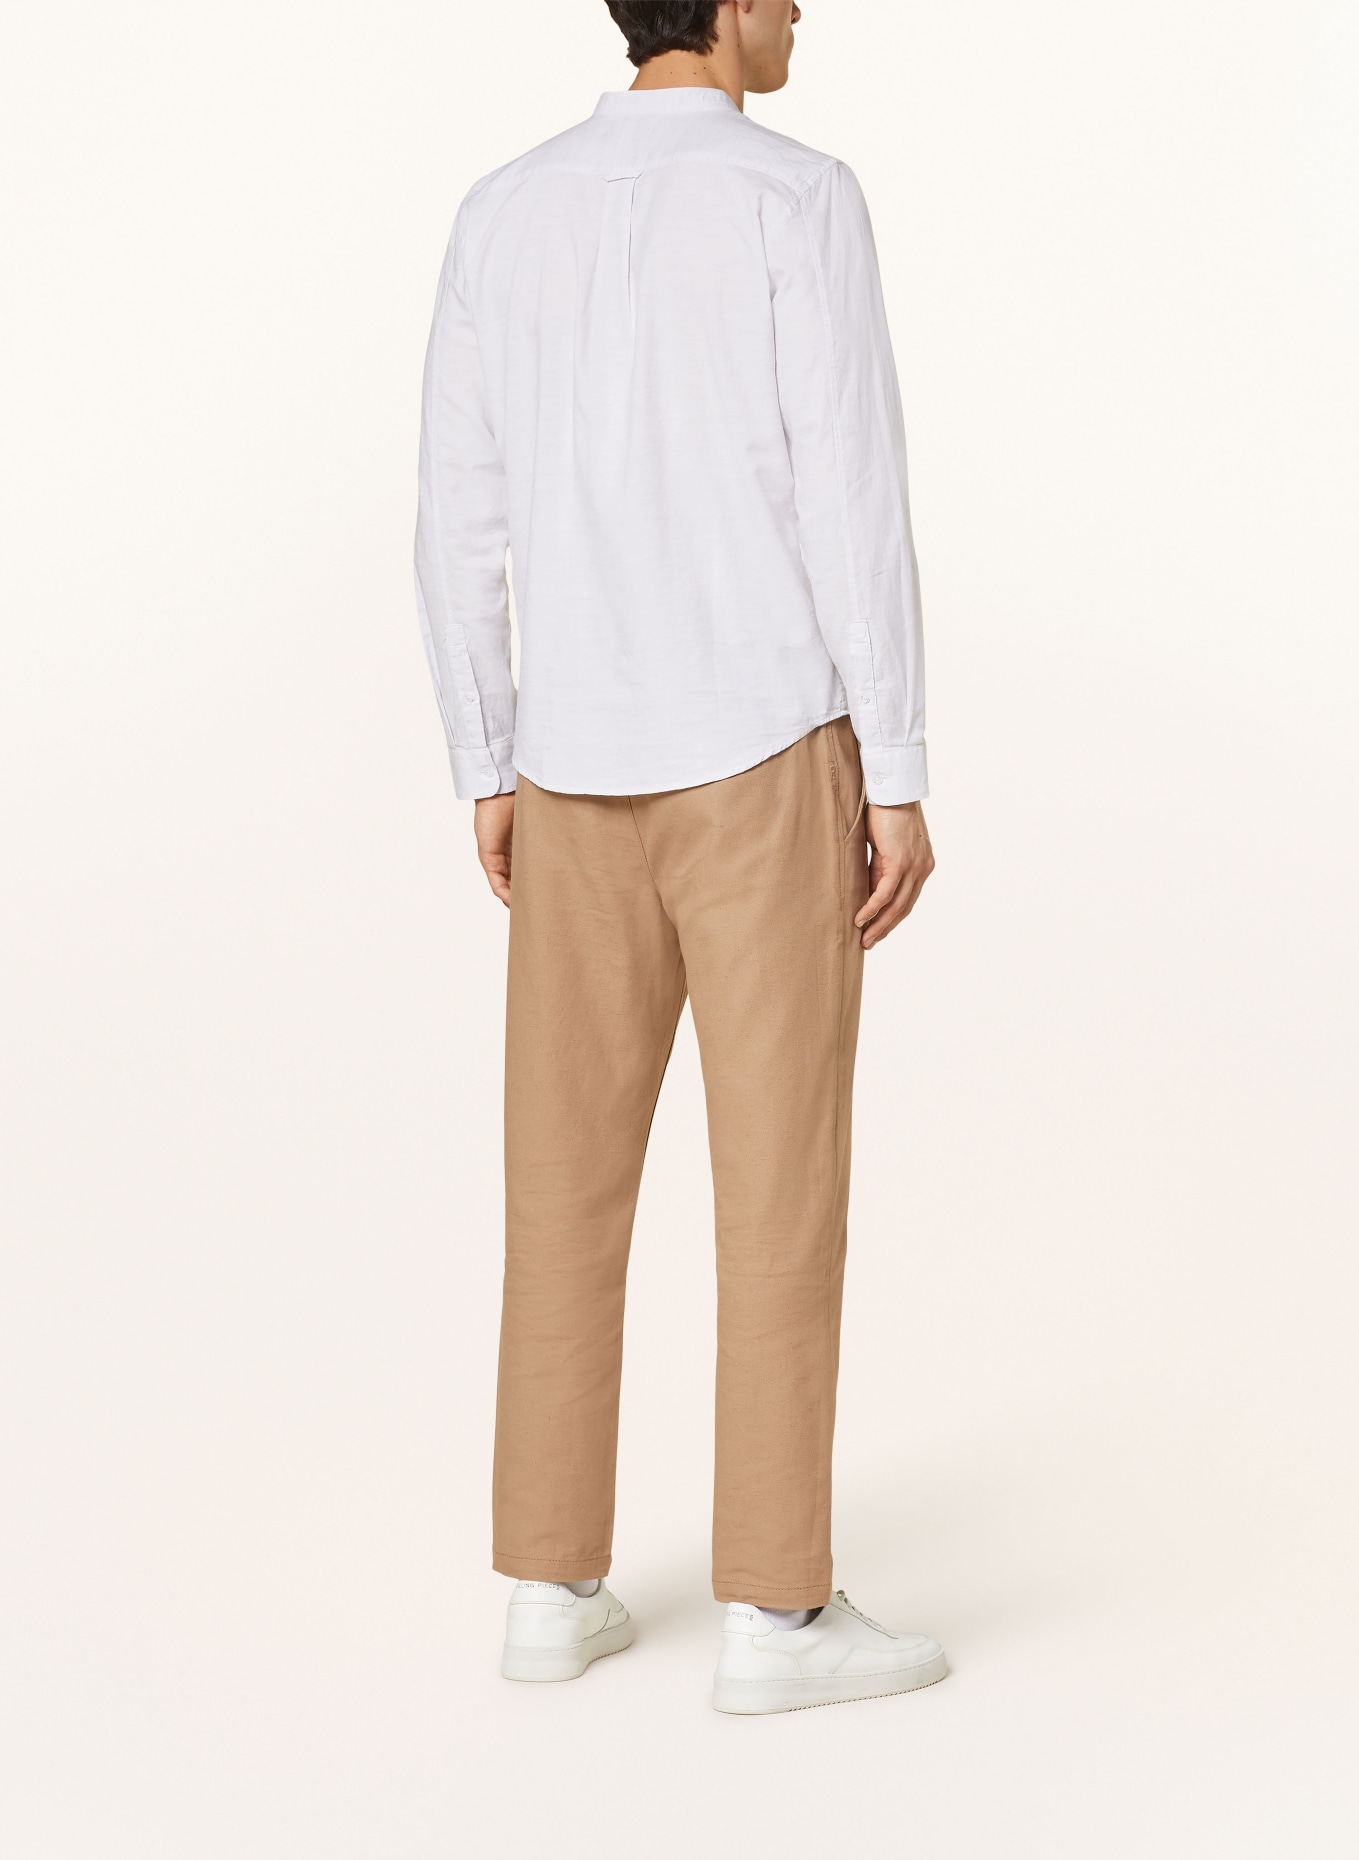 NOWADAYS Shirt regular fit with stand-up collar, Color: LIGHT GRAY (Image 3)